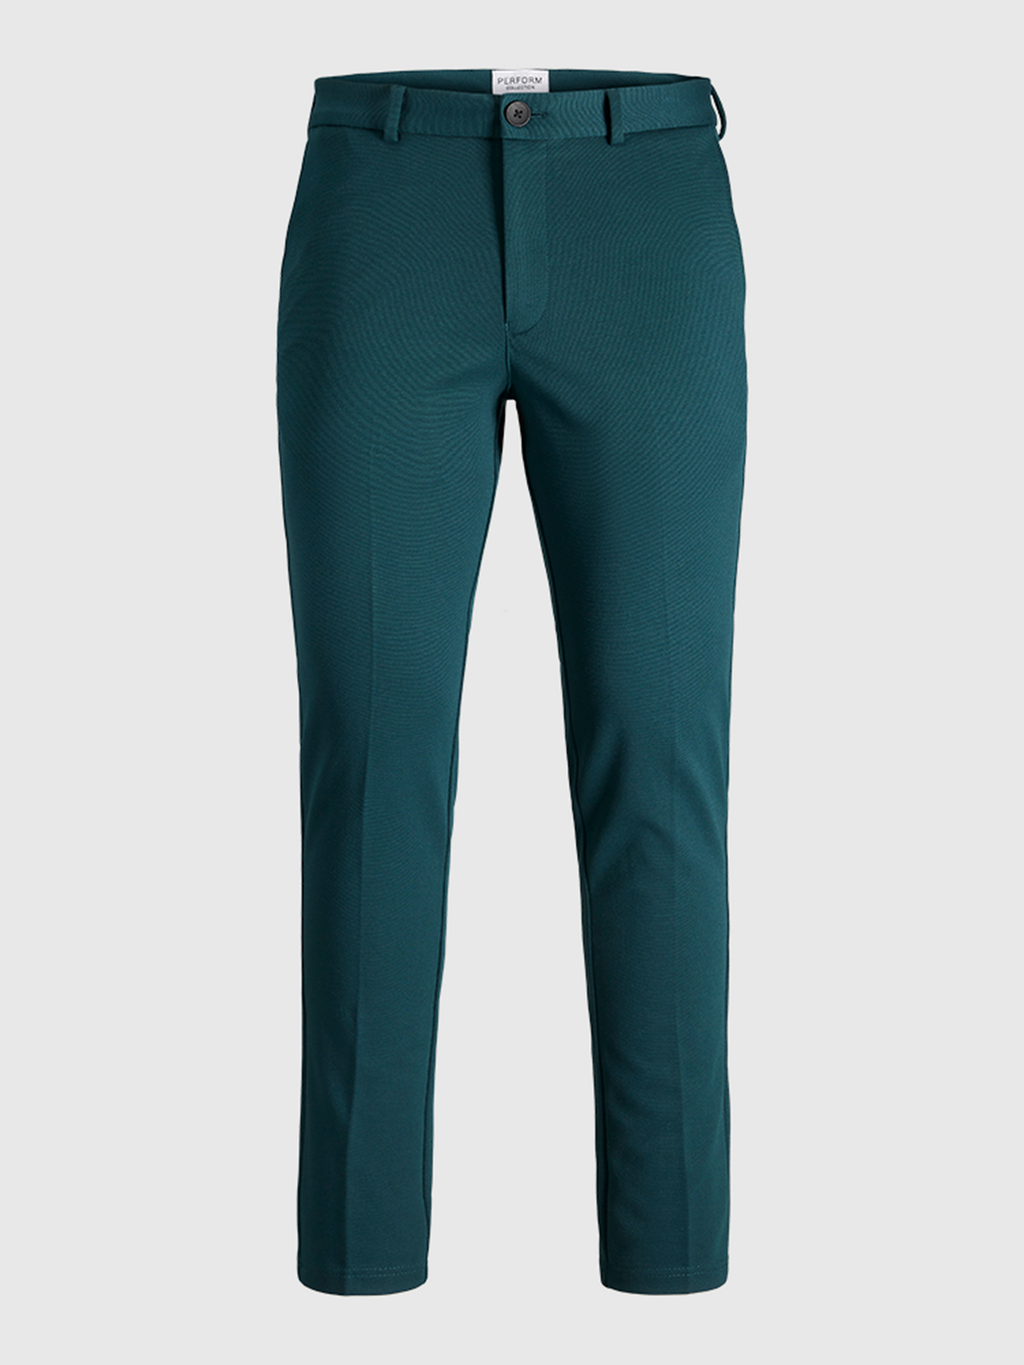 Performance Trousers Kids - Green